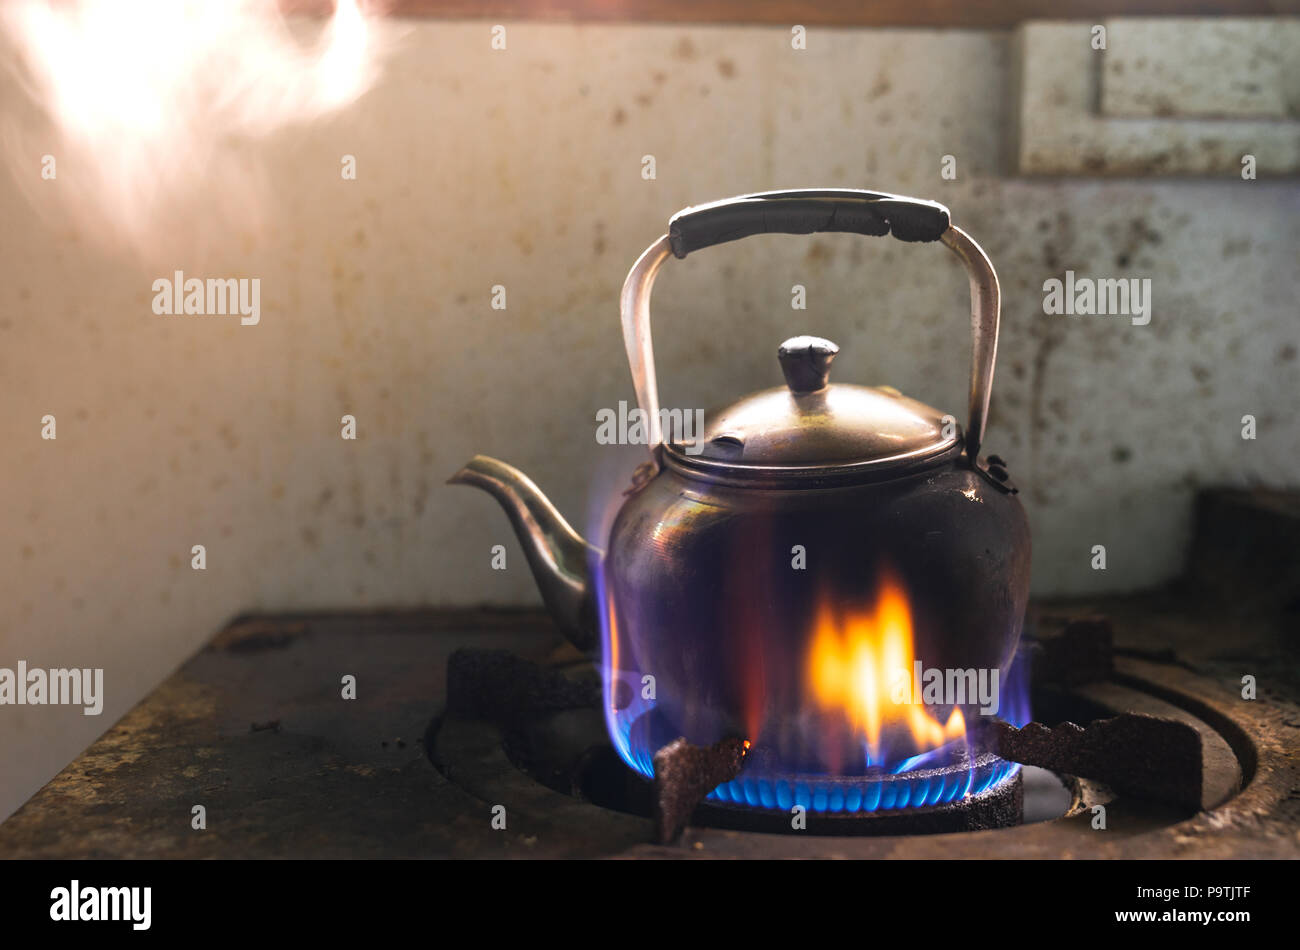 https://c8.alamy.com/comp/P9TJTF/steaming-water-in-traditional-metal-kettle-on-fire-on-gas-stove-in-kitchen-P9TJTF.jpg